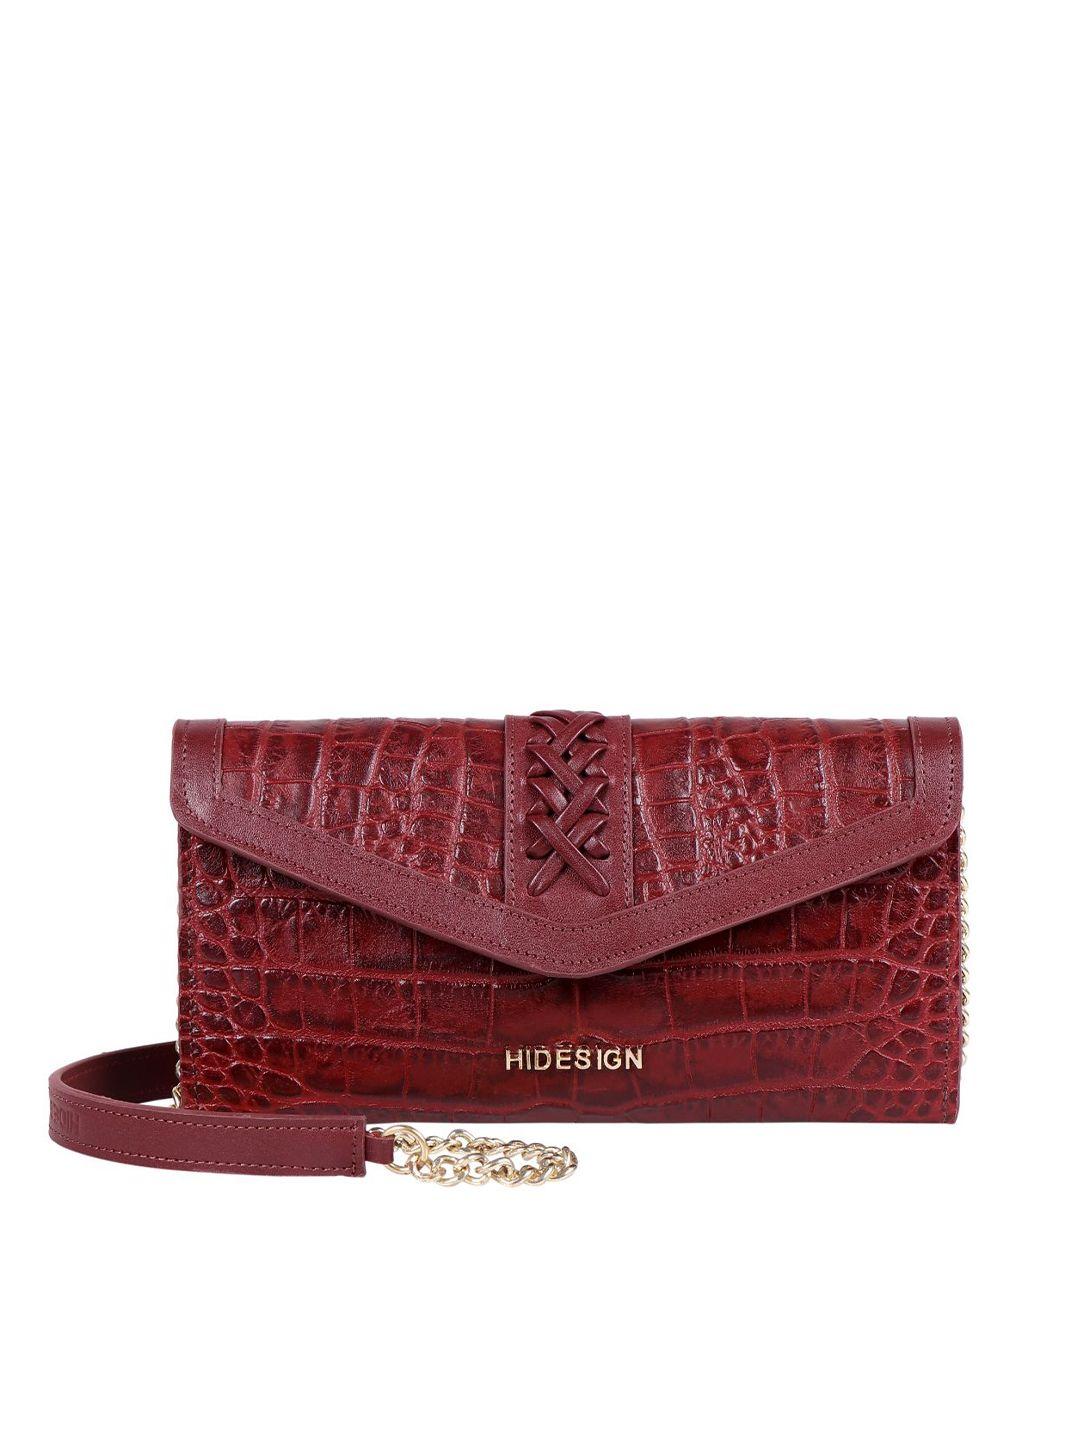 hidesign women red textured leather envelope